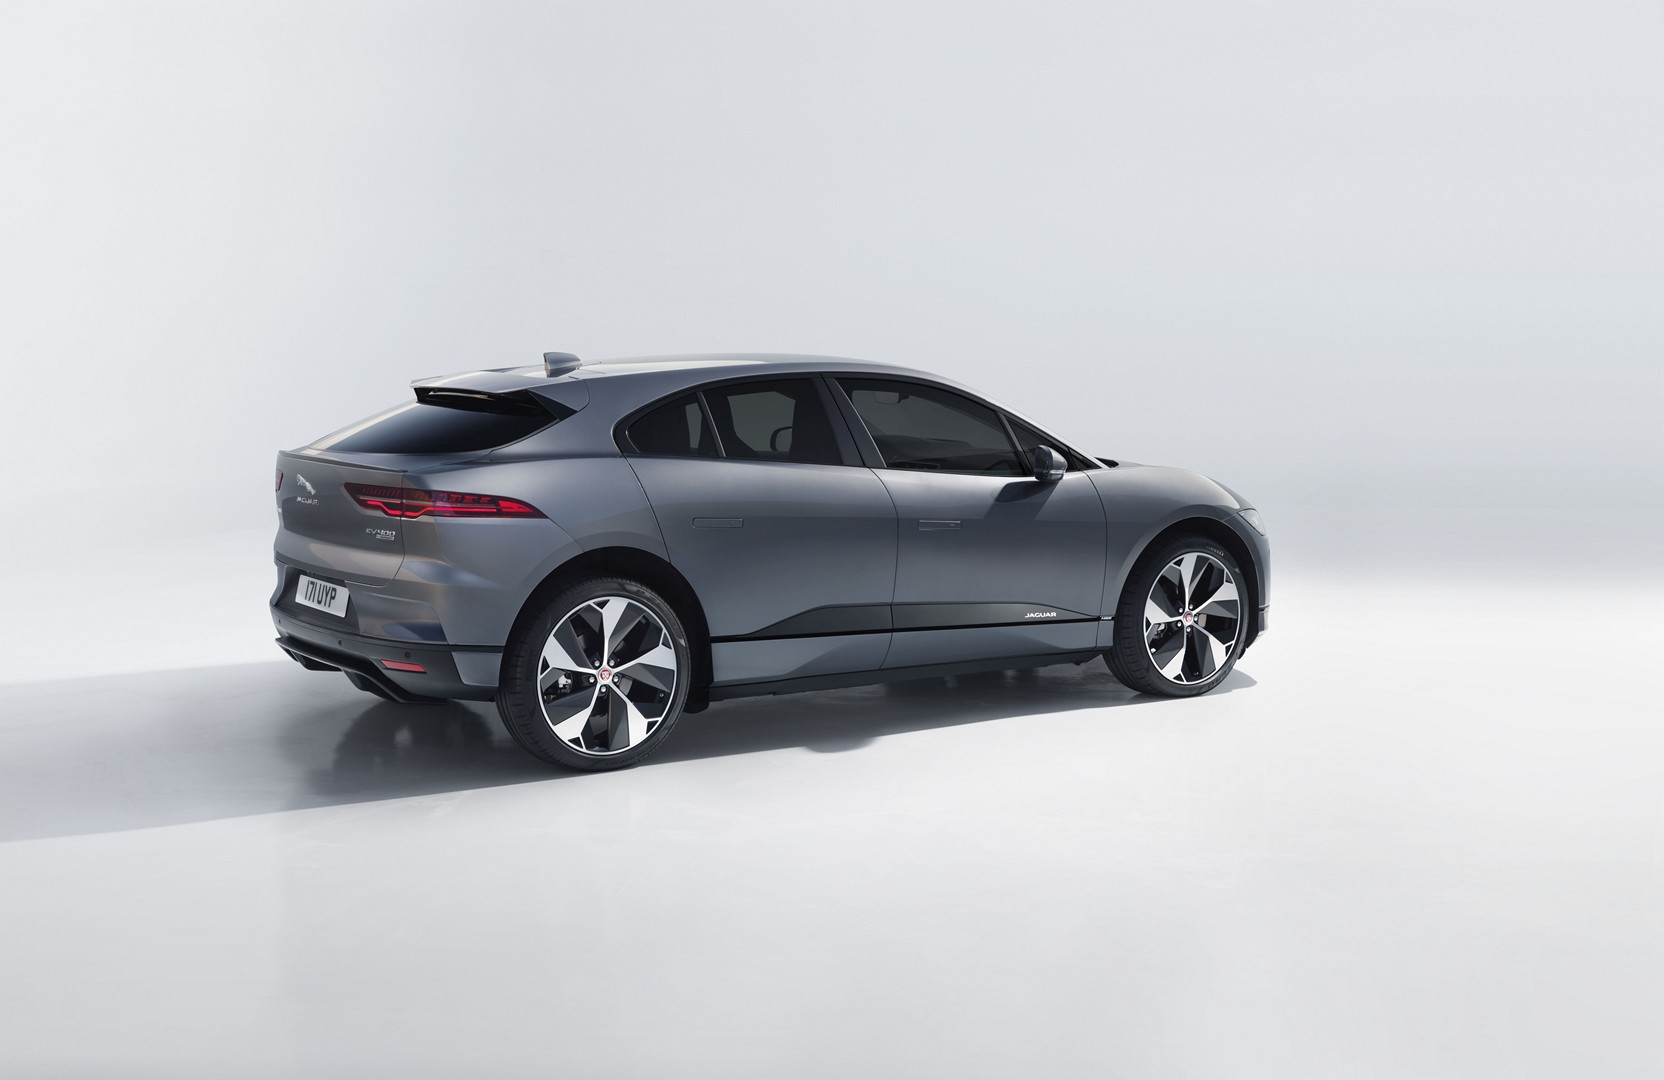 https://s1.cdn.autoevolution.com/images/news/gallery/2020-jaguar-i-pace-update-offers-234-miles-of-range-thanks-to-etrophy-know-how_1.jpg